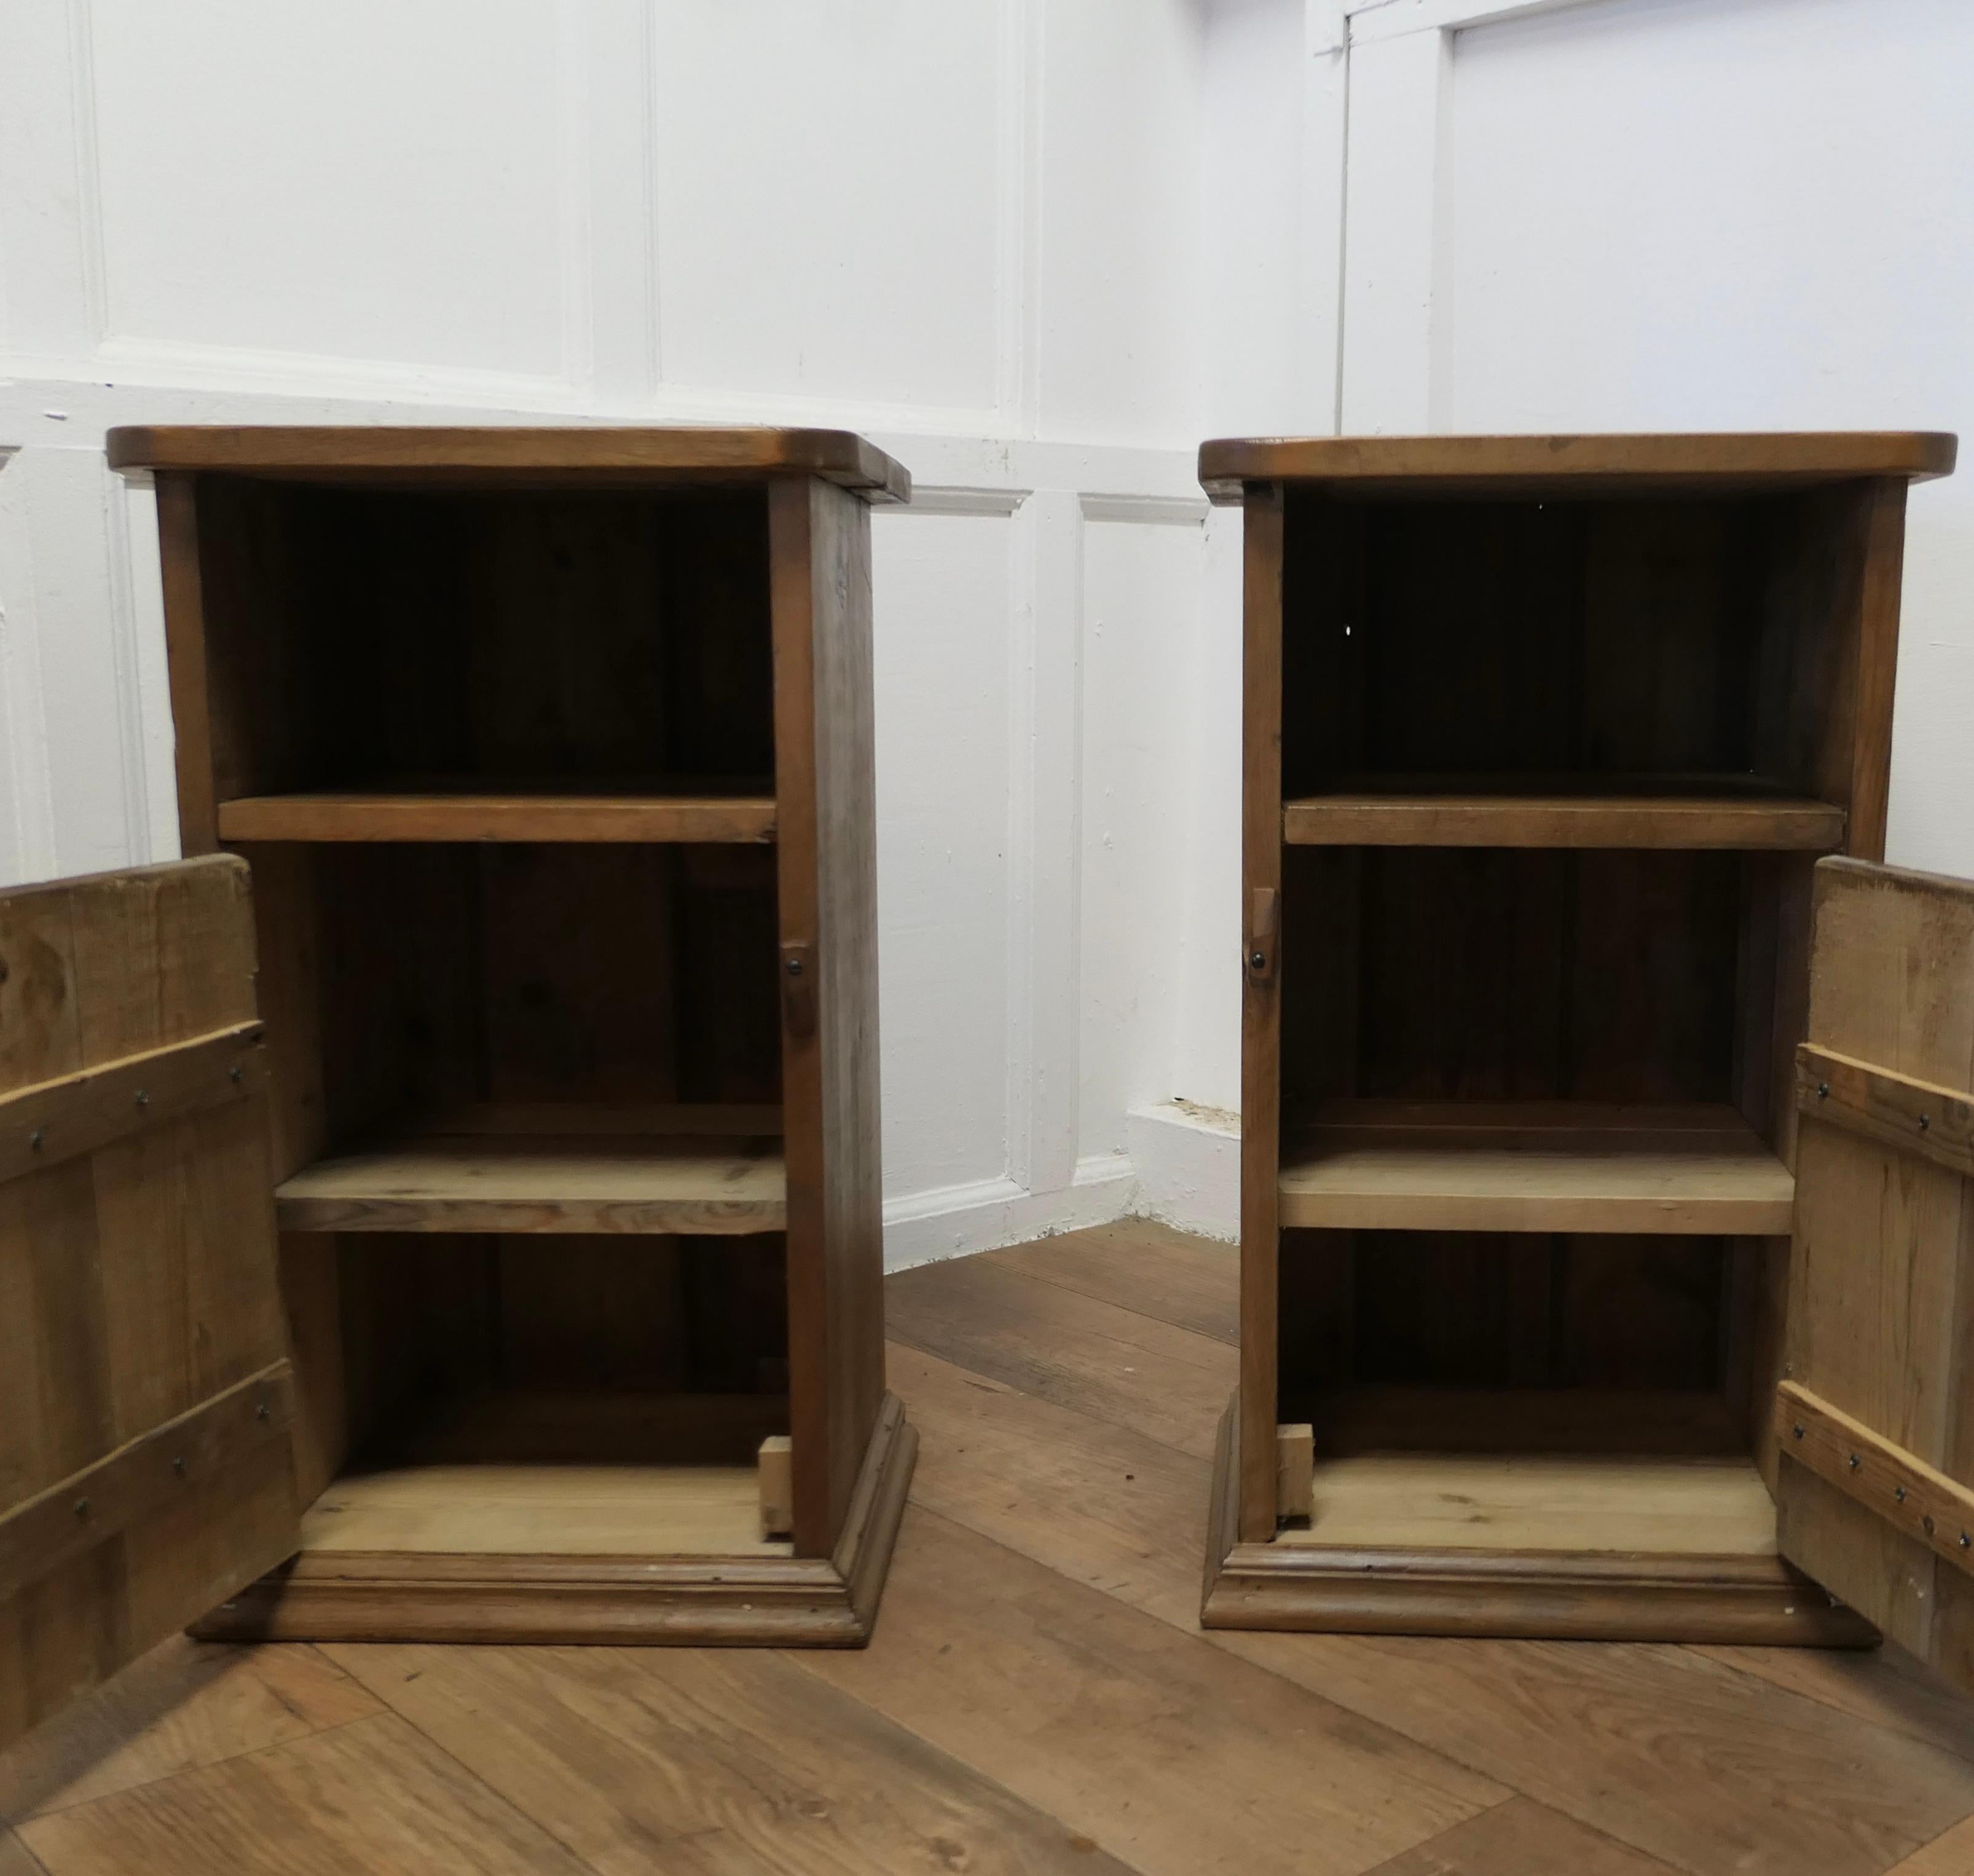 A Pair of Rustic Pine Bedside Cupboards, Night Tables    In Good Condition For Sale In Chillerton, Isle of Wight